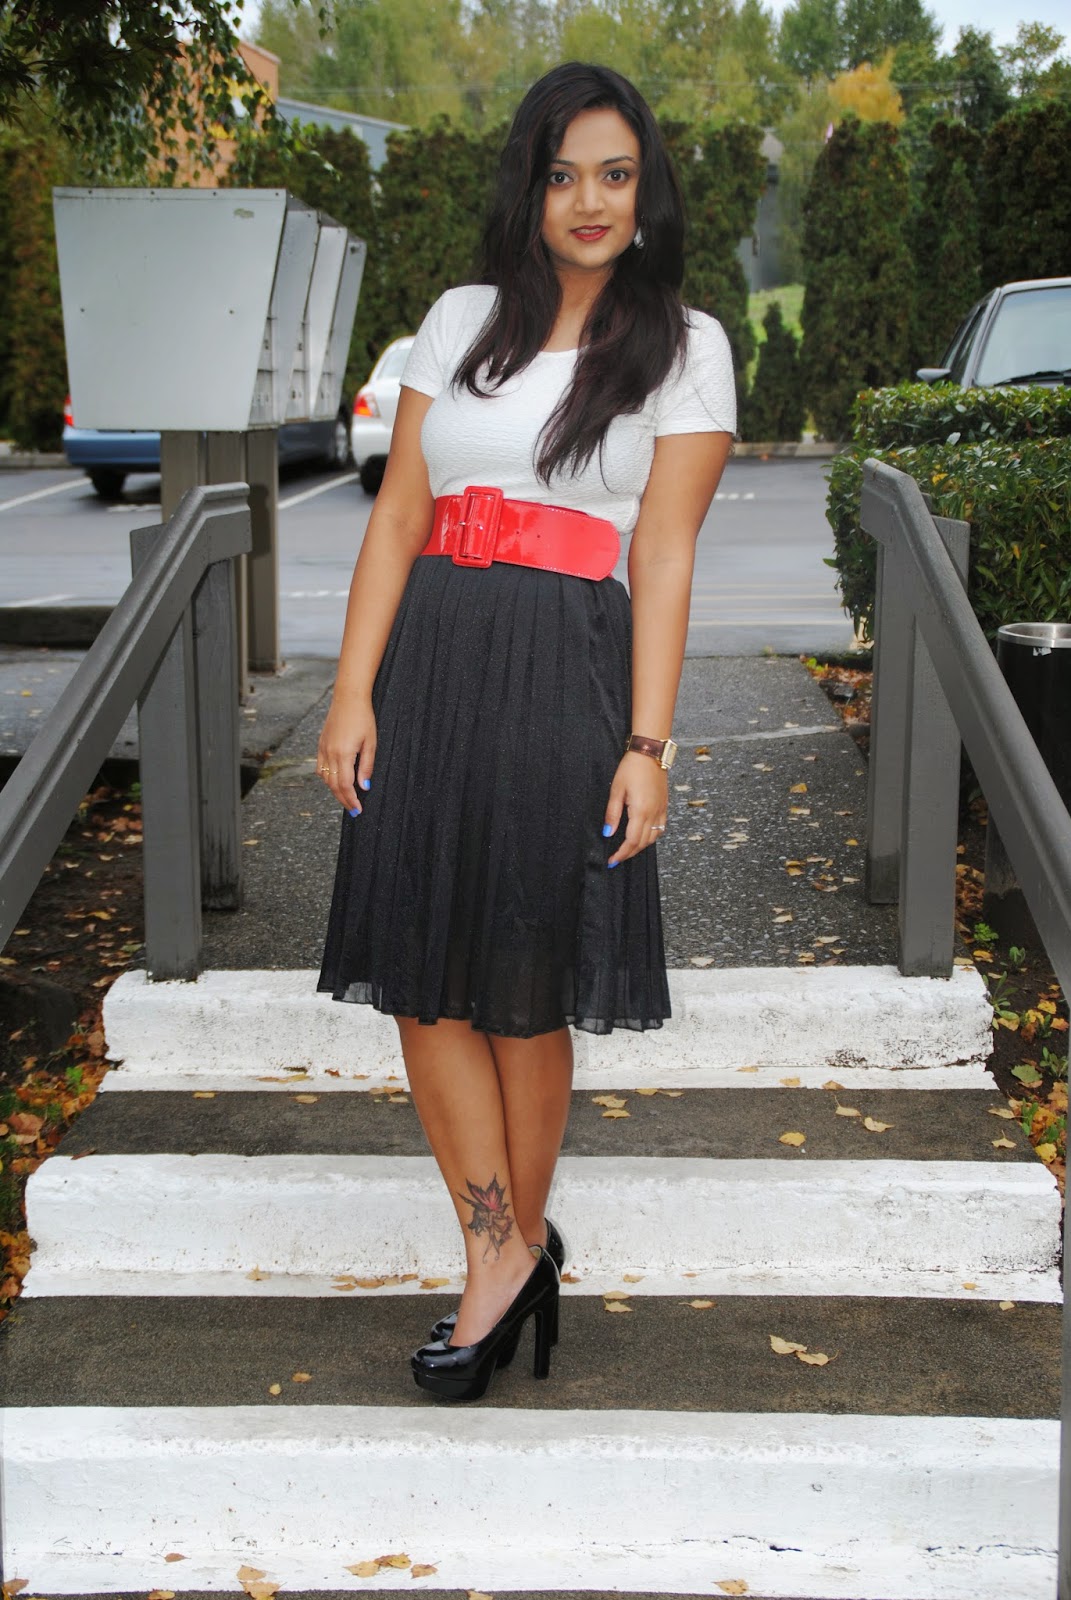 How to style a black skirt in different wyas, Ananya in a skirt, Ananya Kiran, Styling tips for Indian Women, Black skirt with white top, style tips for fall